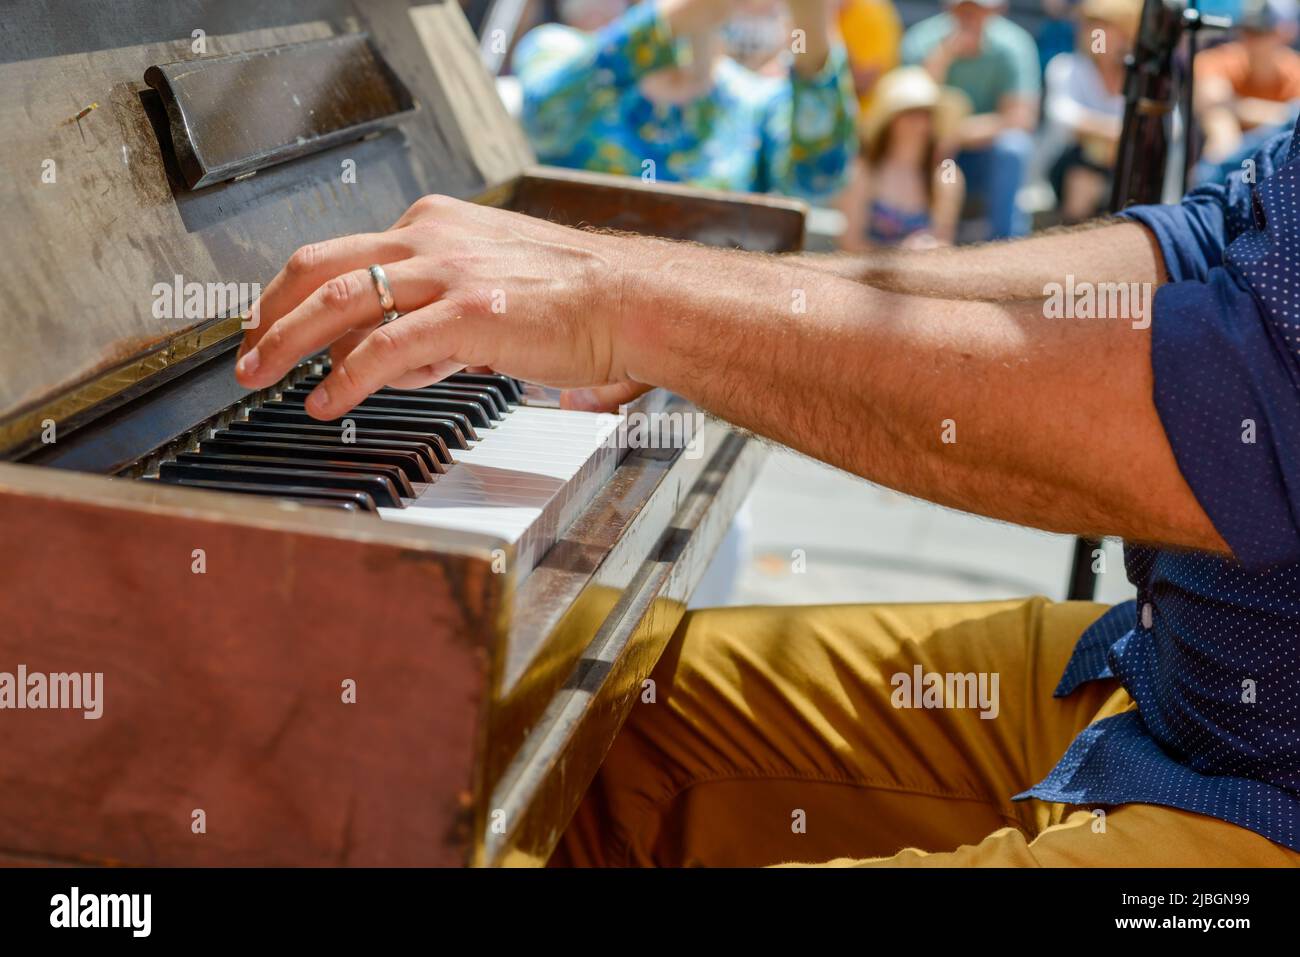 Pianist's hands and piano keys as he plays the piano with blurred crowd in the background at French Quarter Festival in New Orleans, LA, USA Stock Photo